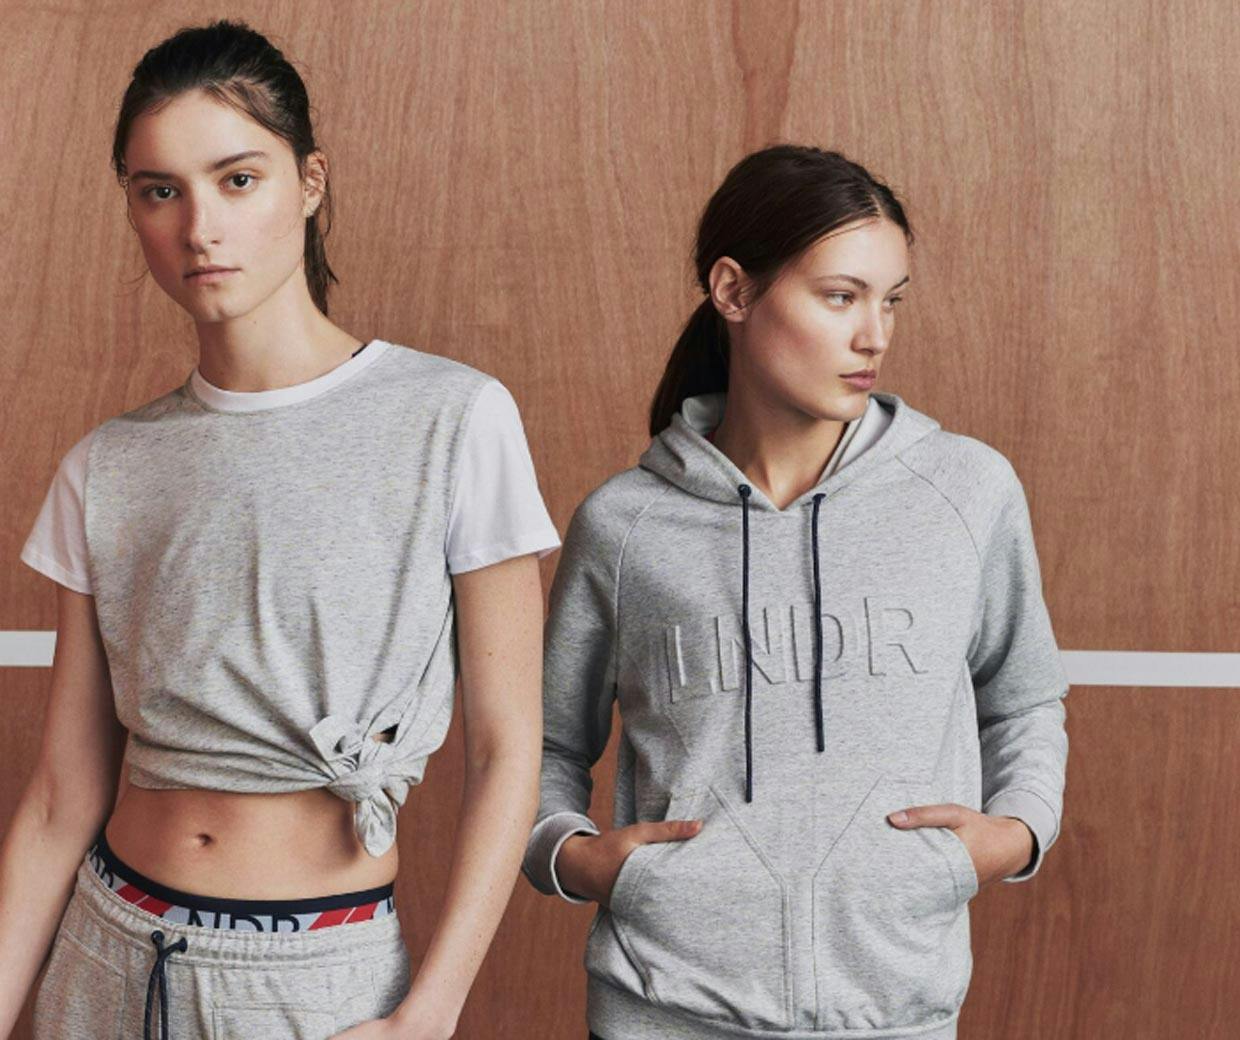 Interview: Talking Activewear with LNDR, Coggles